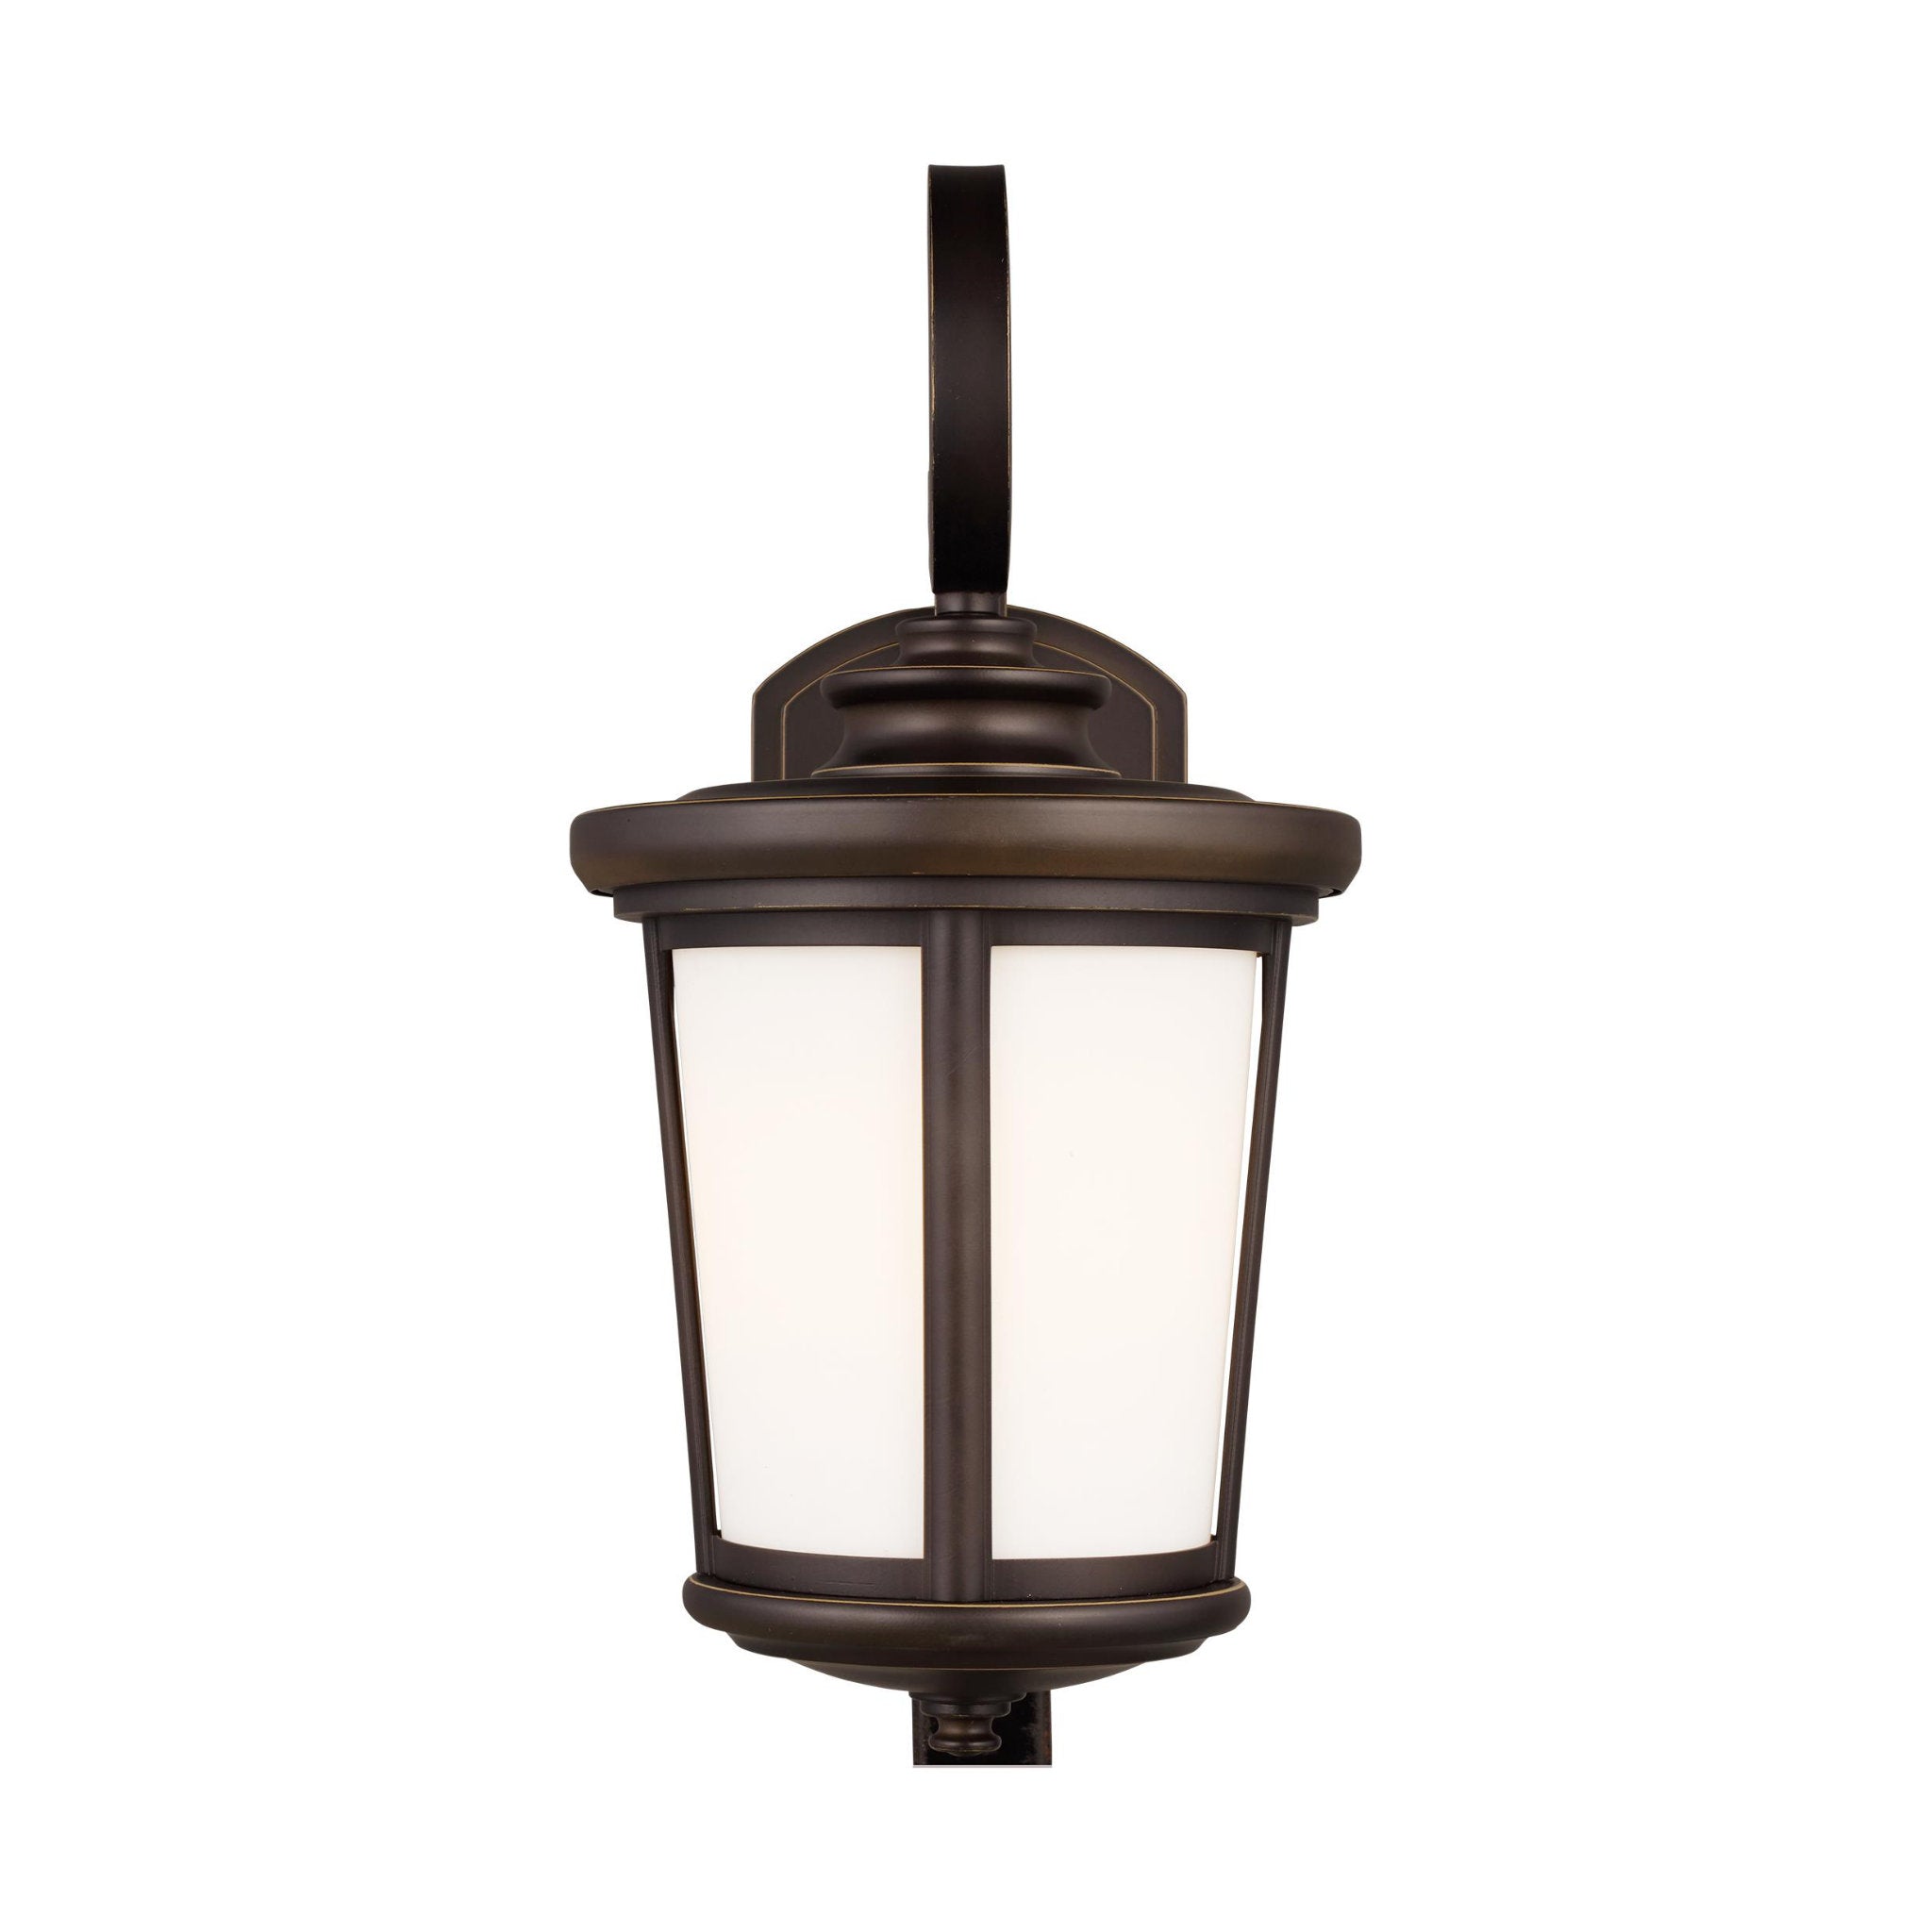 Eddington Medium One Light Outdoor Wall Lantern Traditional Fixture 8" Width 16.125" Height Aluminum Round Cased Opal Etched Shade in Antique Bronze